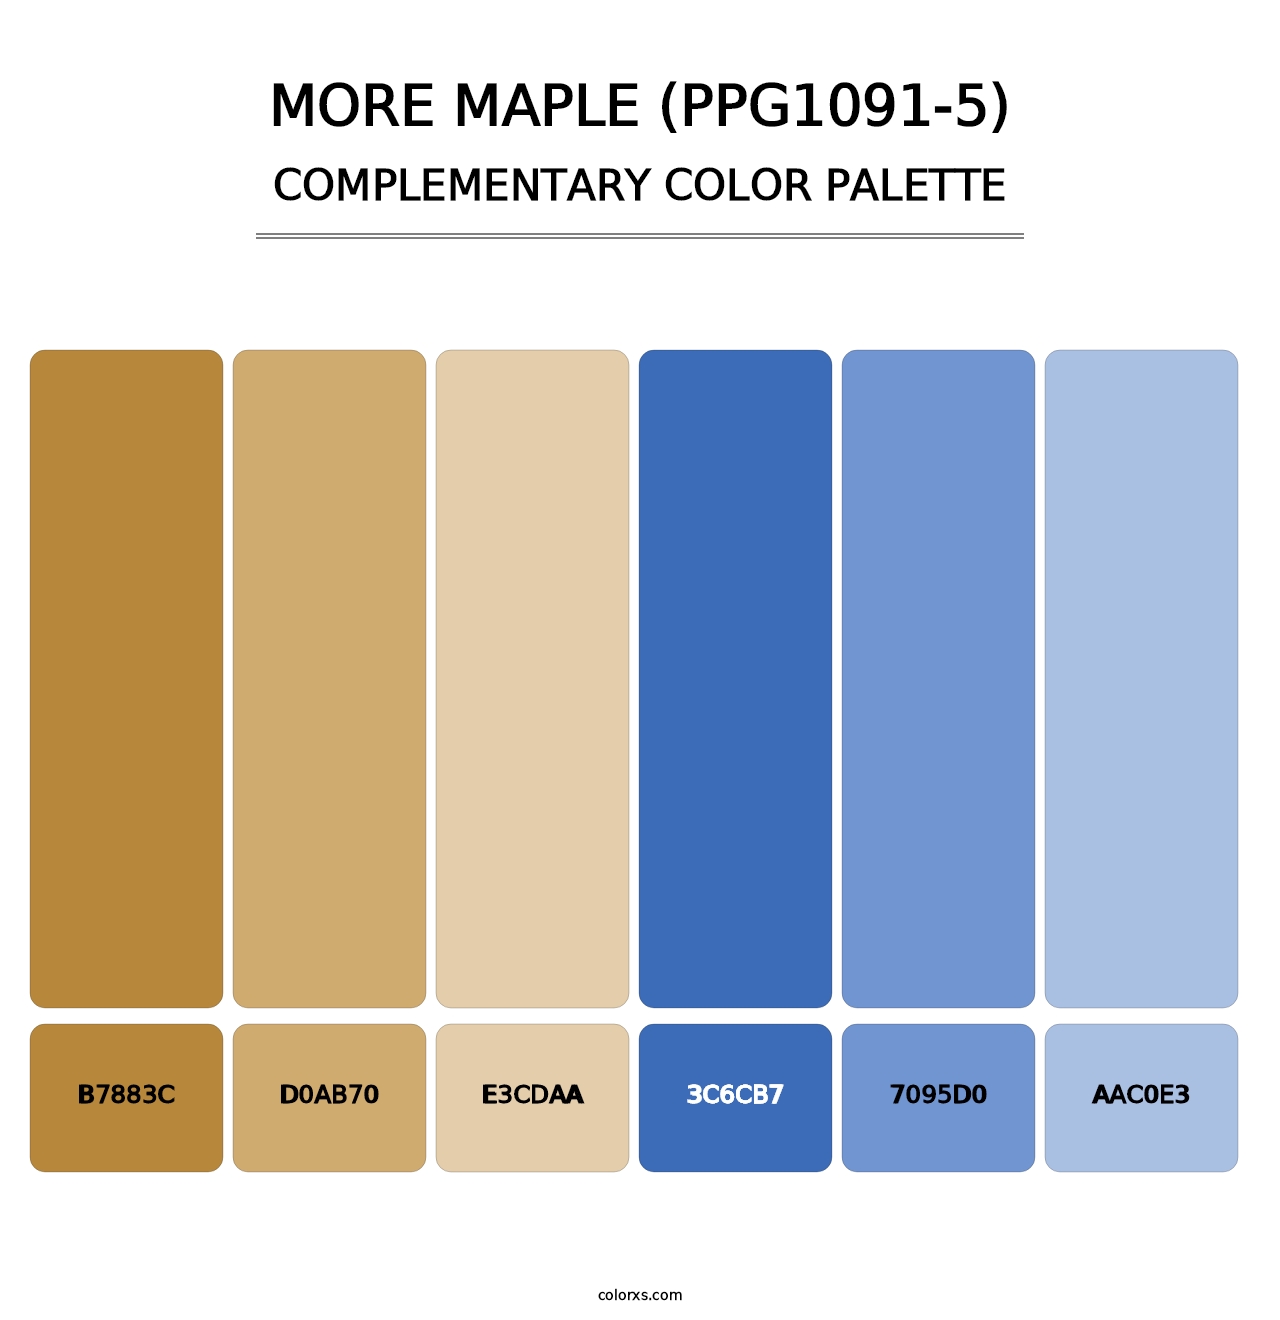 More Maple (PPG1091-5) - Complementary Color Palette